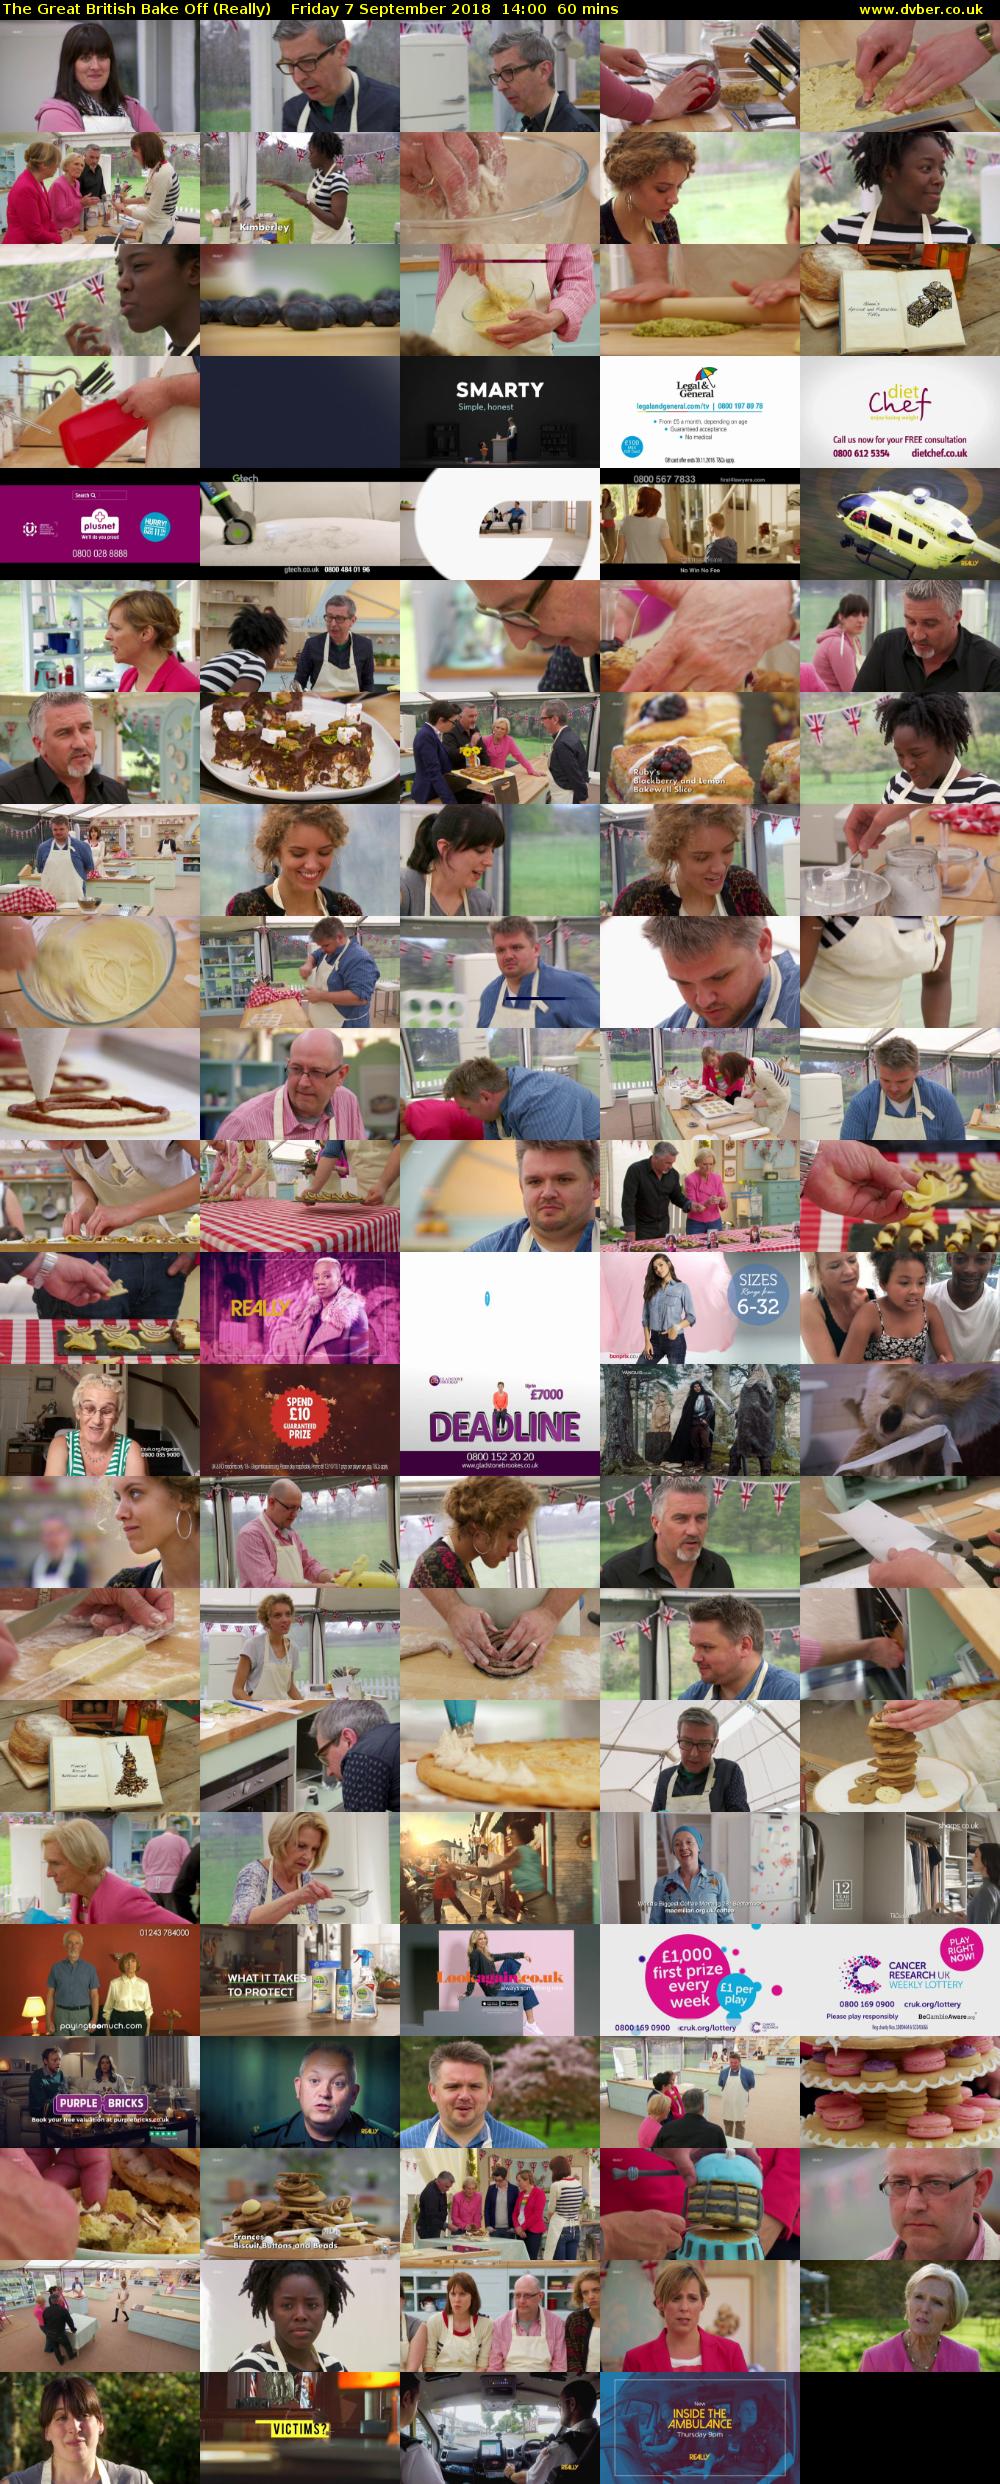 The Great British Bake Off (Really) Friday 7 September 2018 14:00 - 15:00